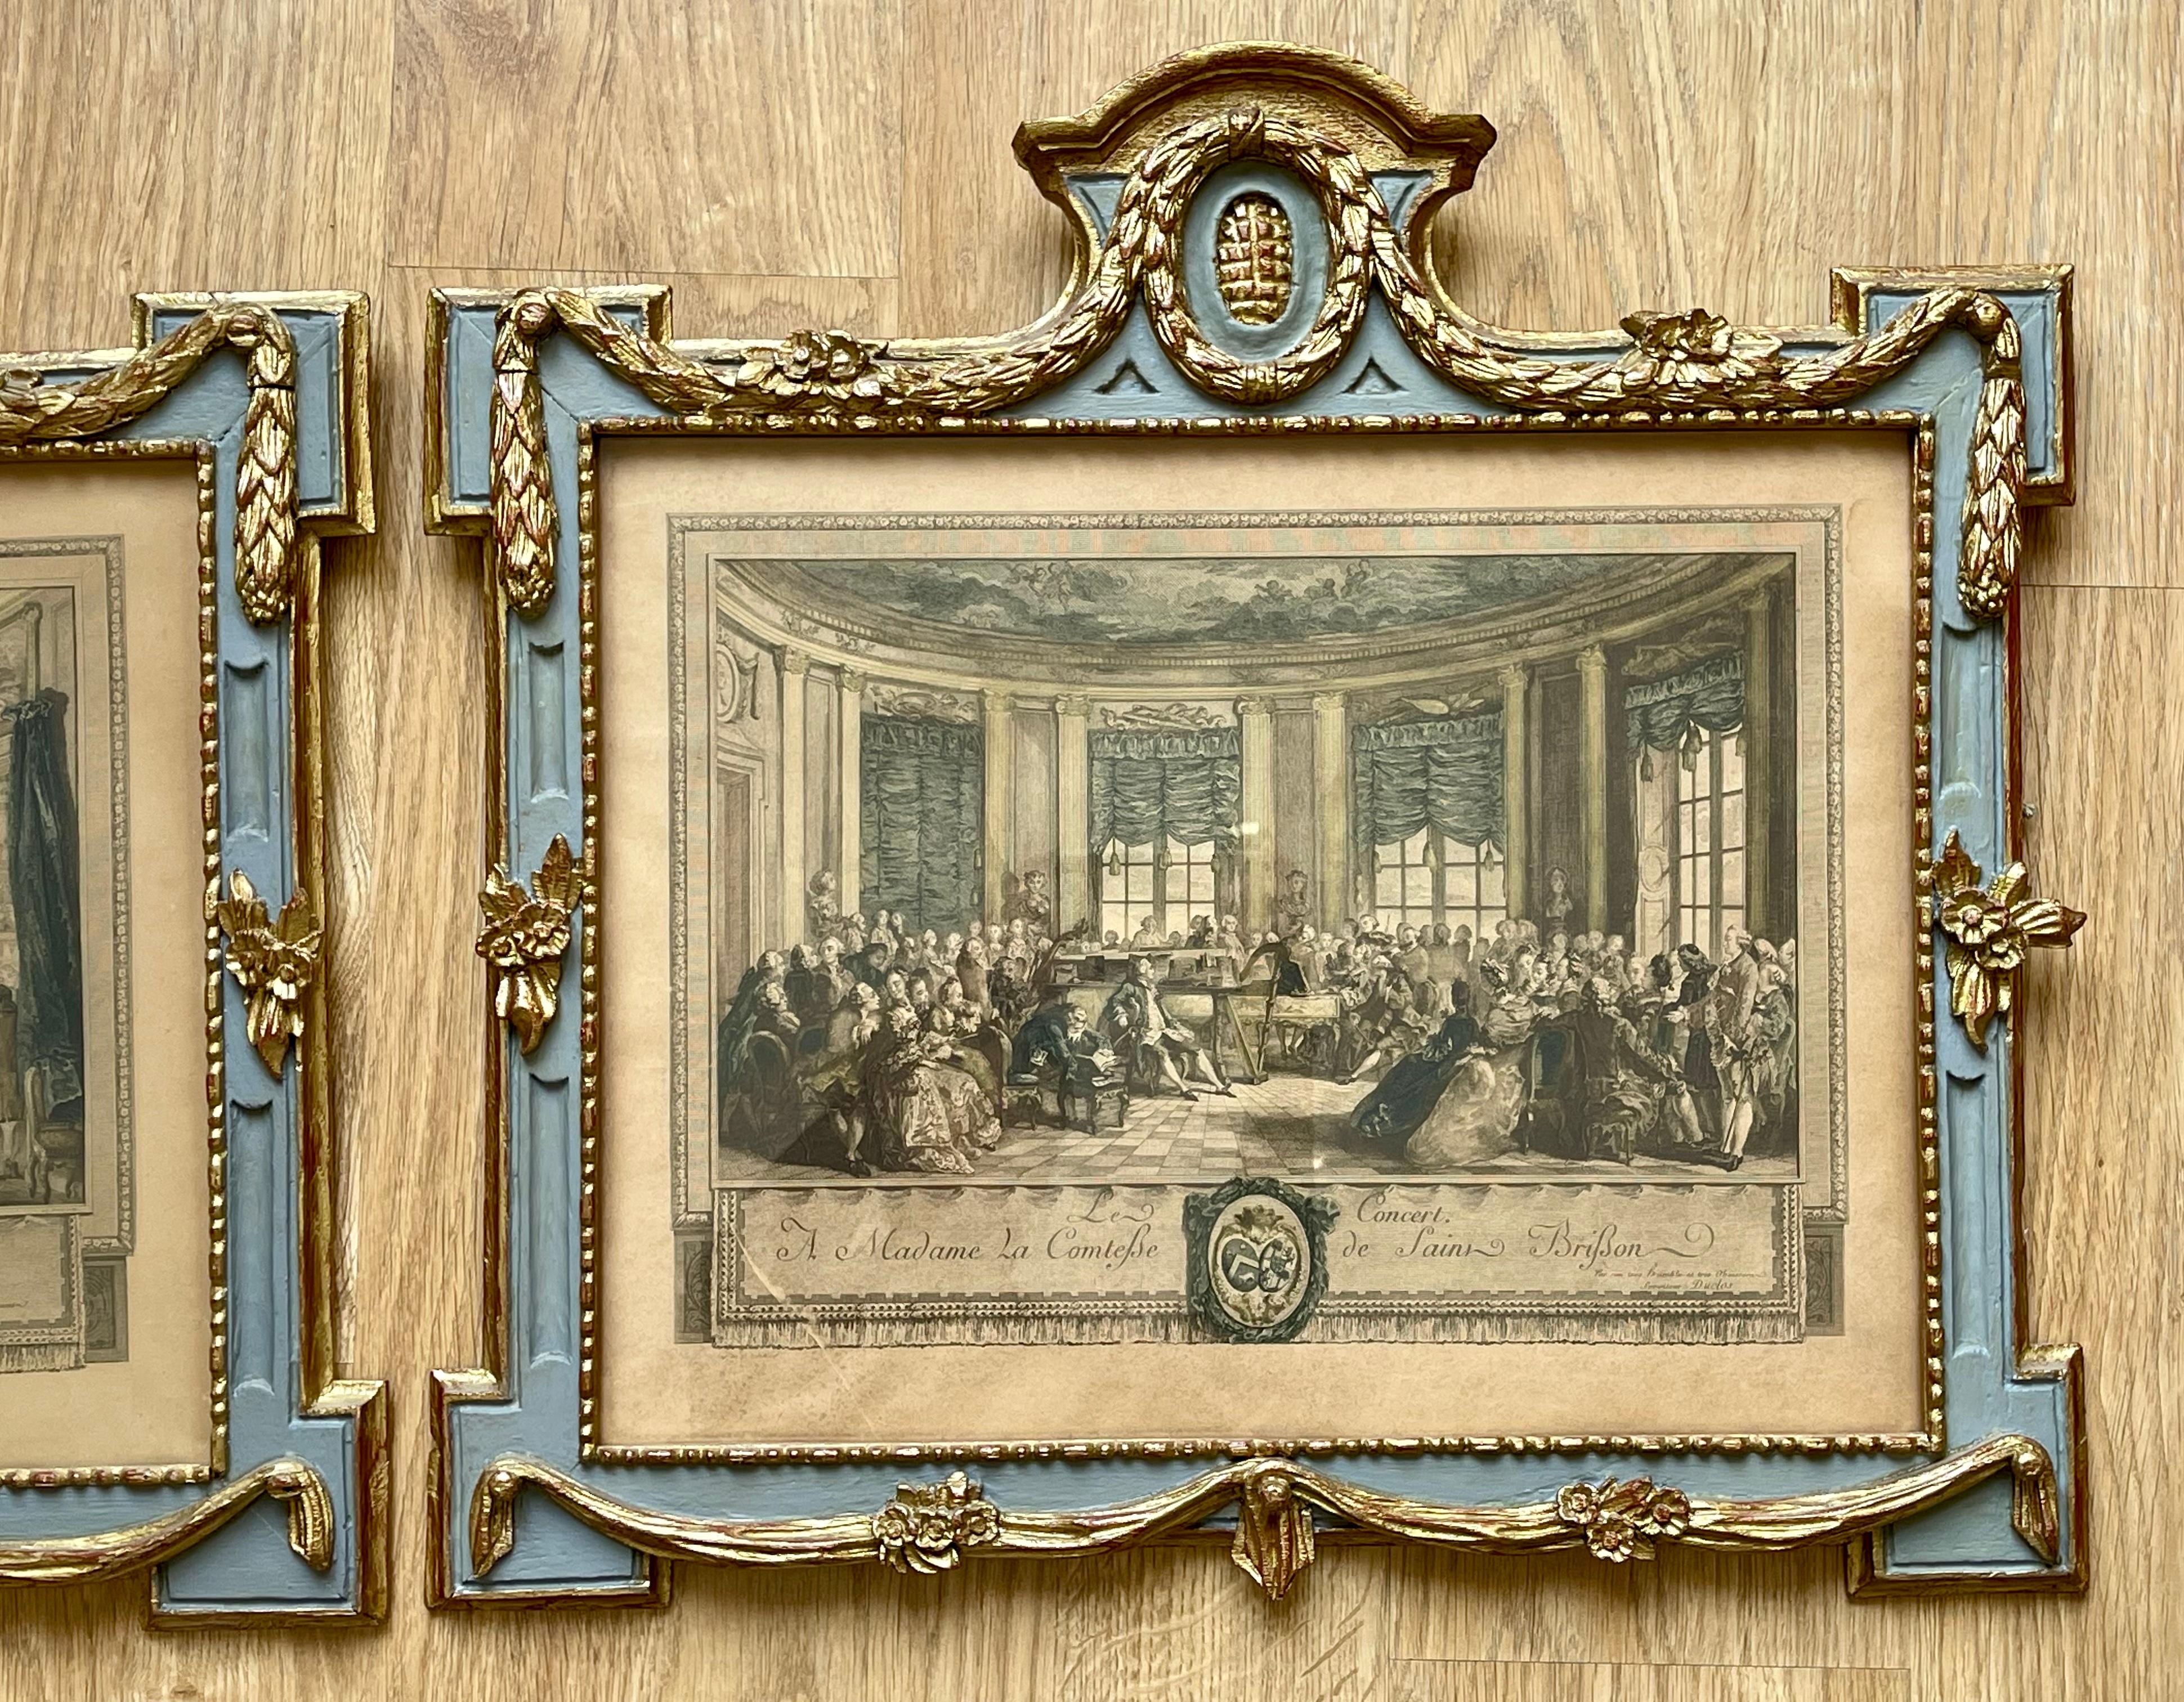 Lovely pair of Louis XVI style frames with pretty engravings depicting social ball scenes on the inside.